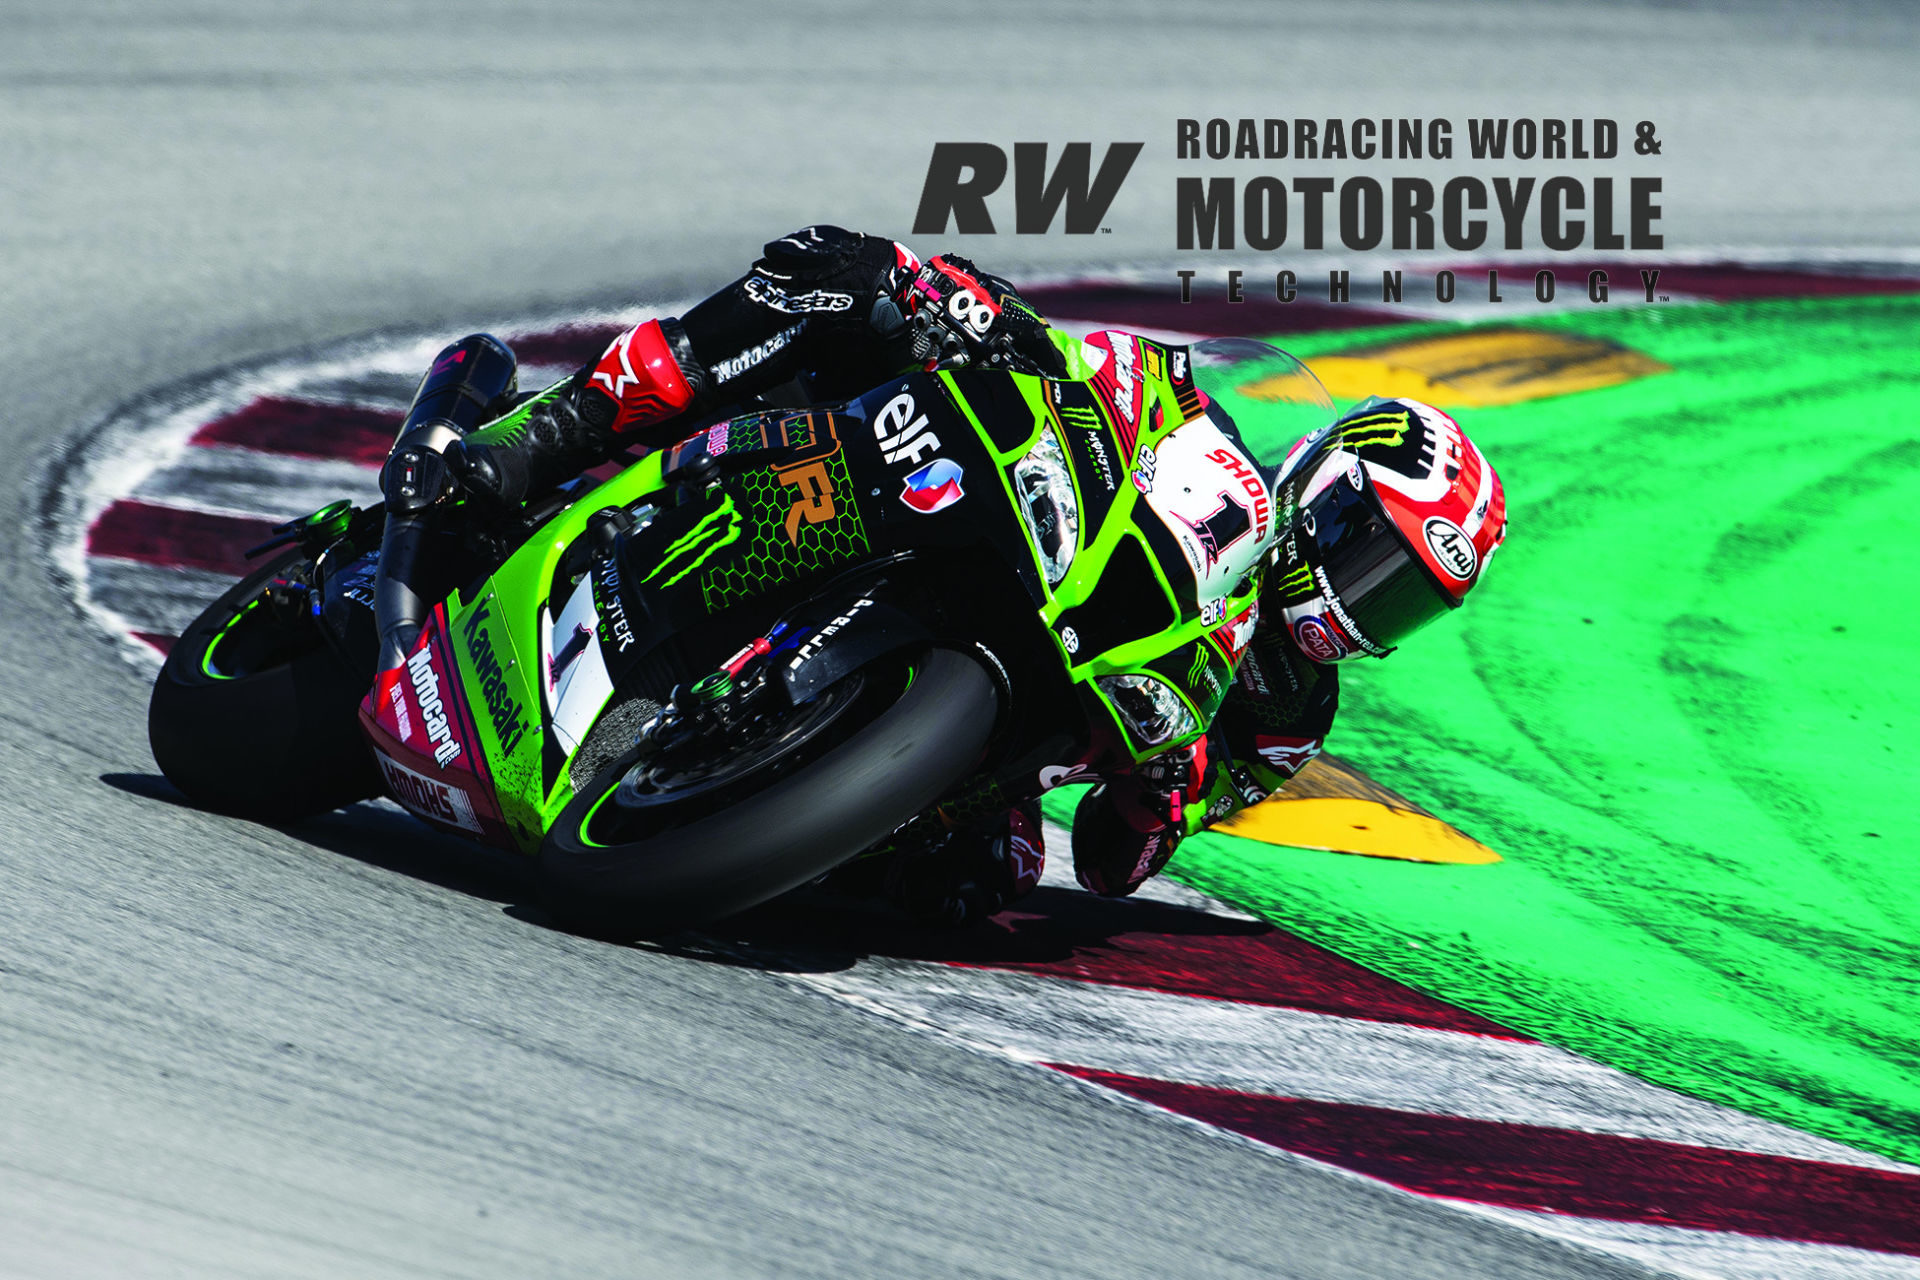 Why Aren't MotoGP Bikes Much Quicker Than World Superbikes? In The August Issue - World Magazine | Motorcycle Riding, Racing & Tech News